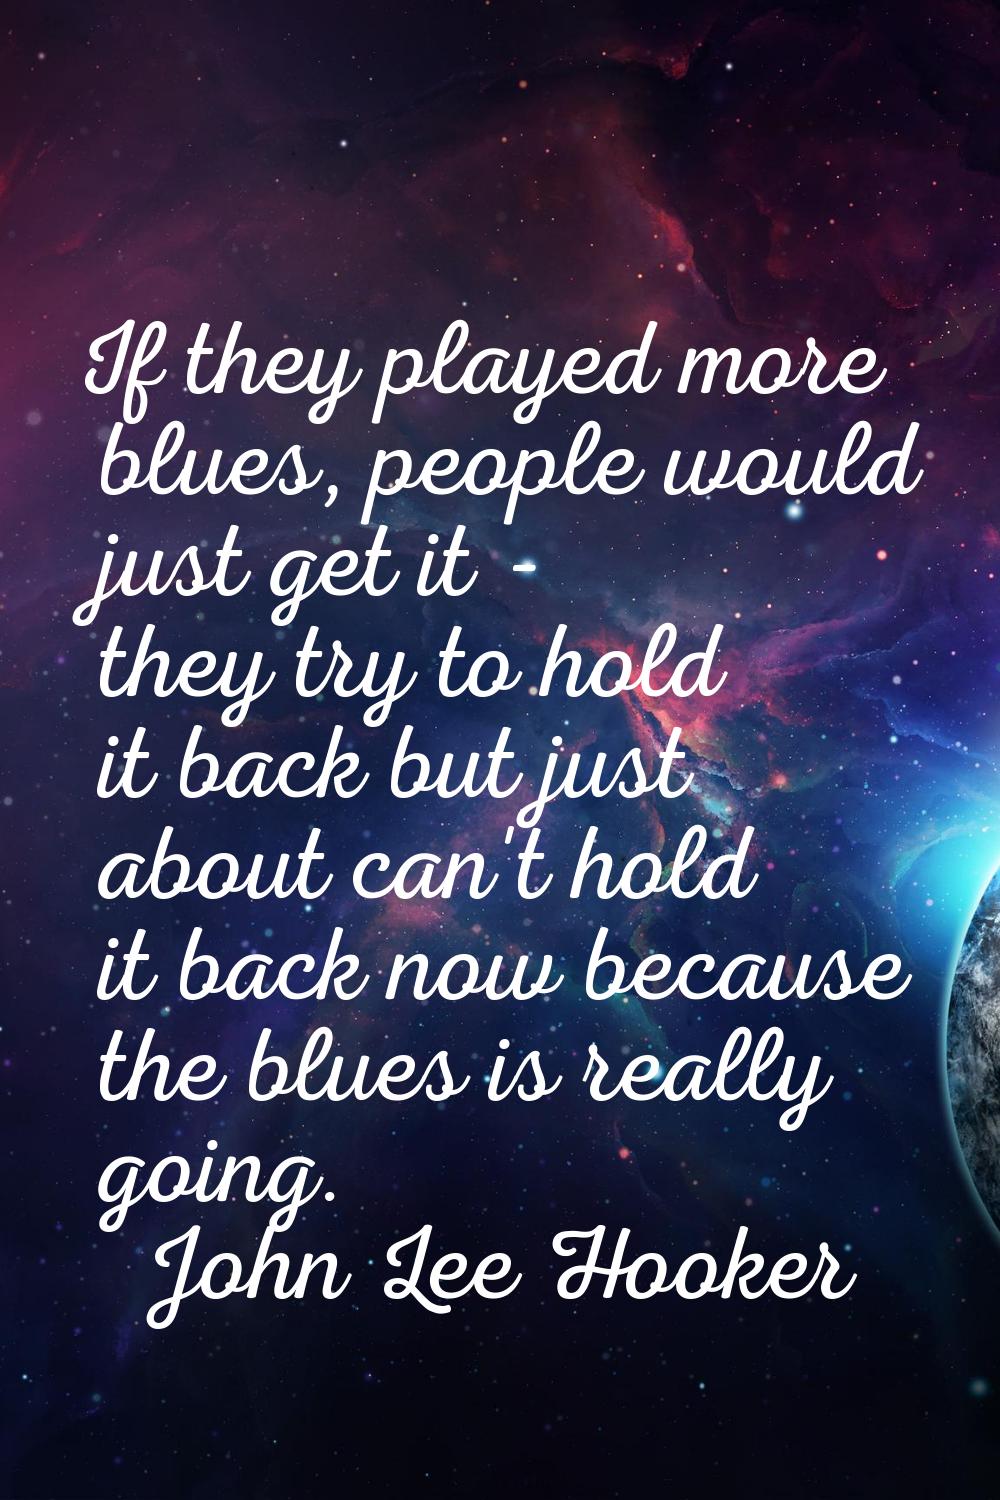 If they played more blues, people would just get it - they try to hold it back but just about can't